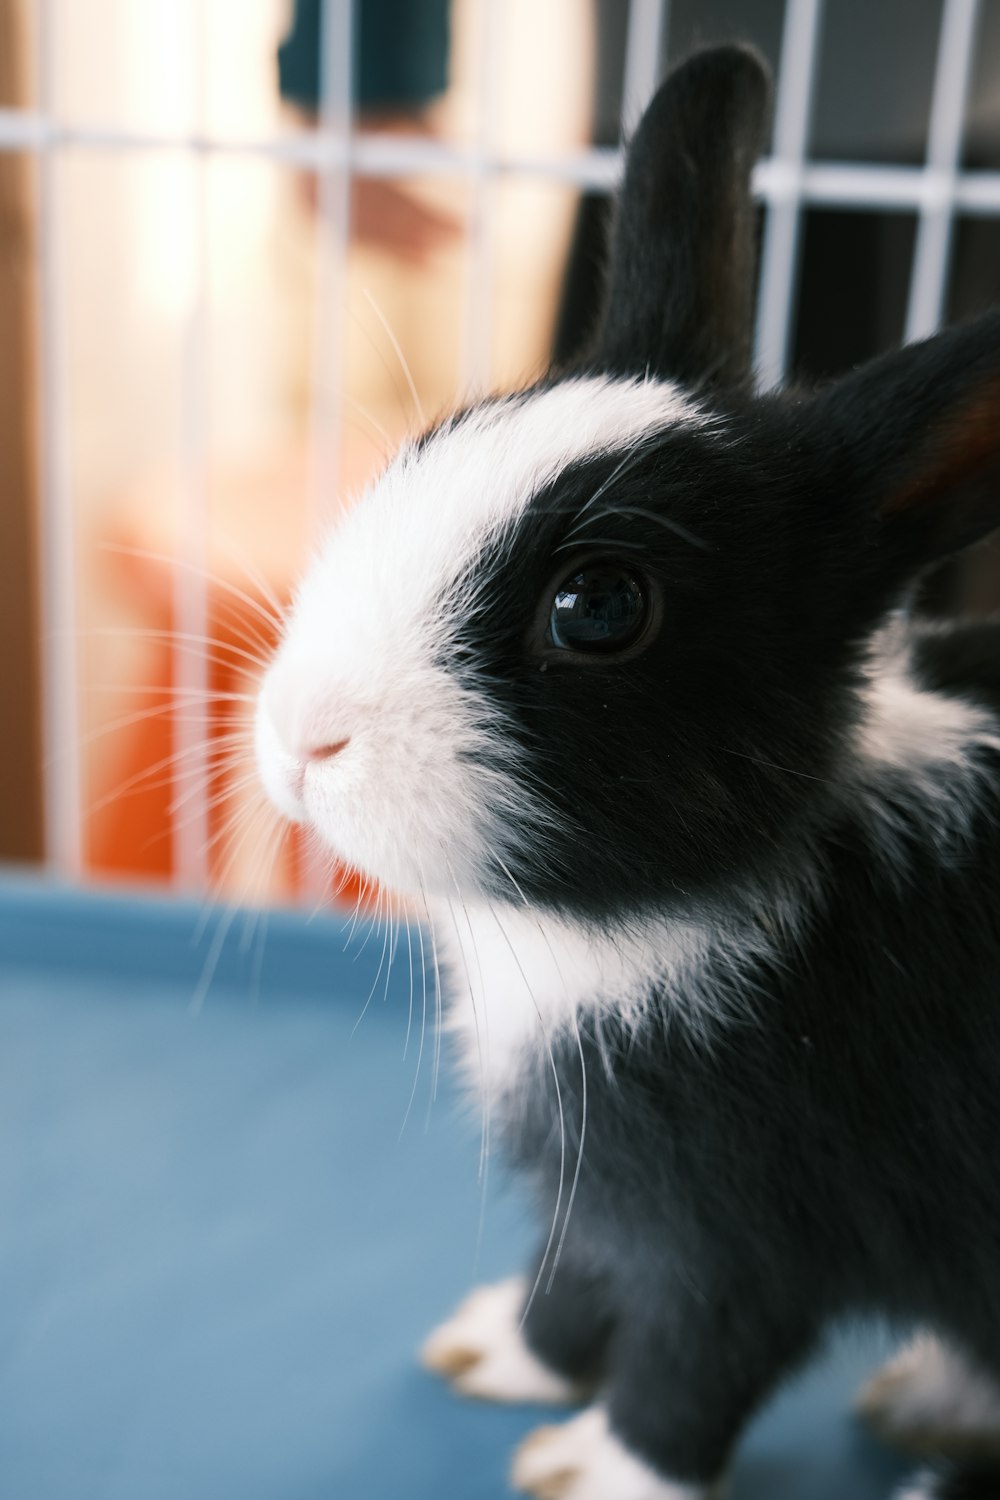 Cute Rabbit Pictures | Download Free Images on Unsplash